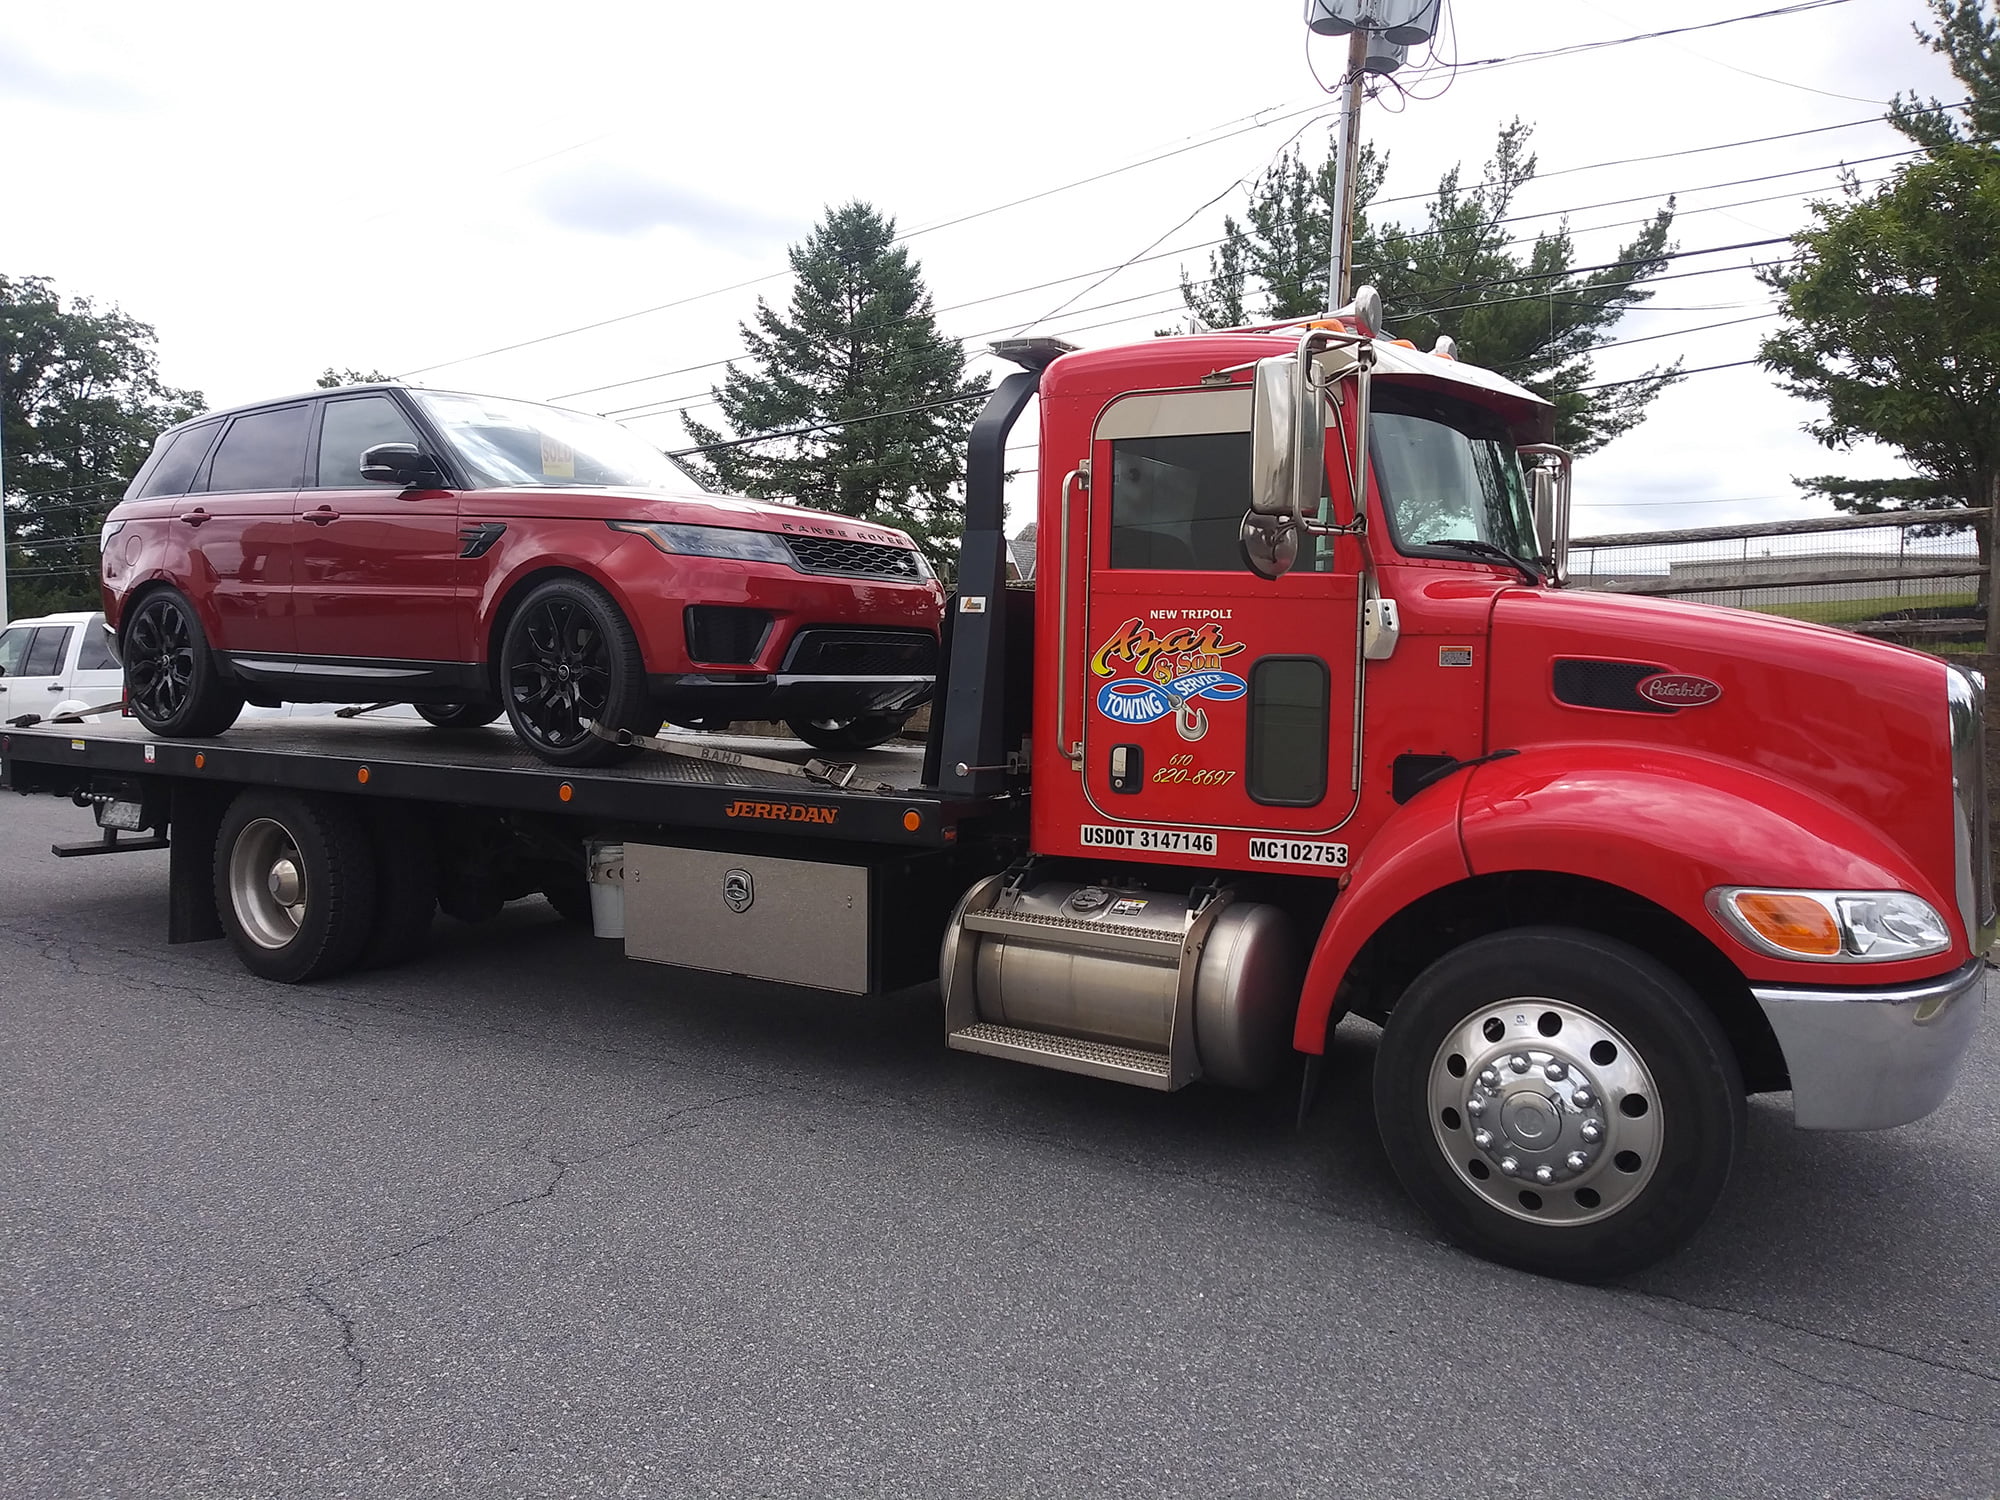 A red-cabbed Azar flatbed tow truck hauling a red luxury SUV out of a parking lot